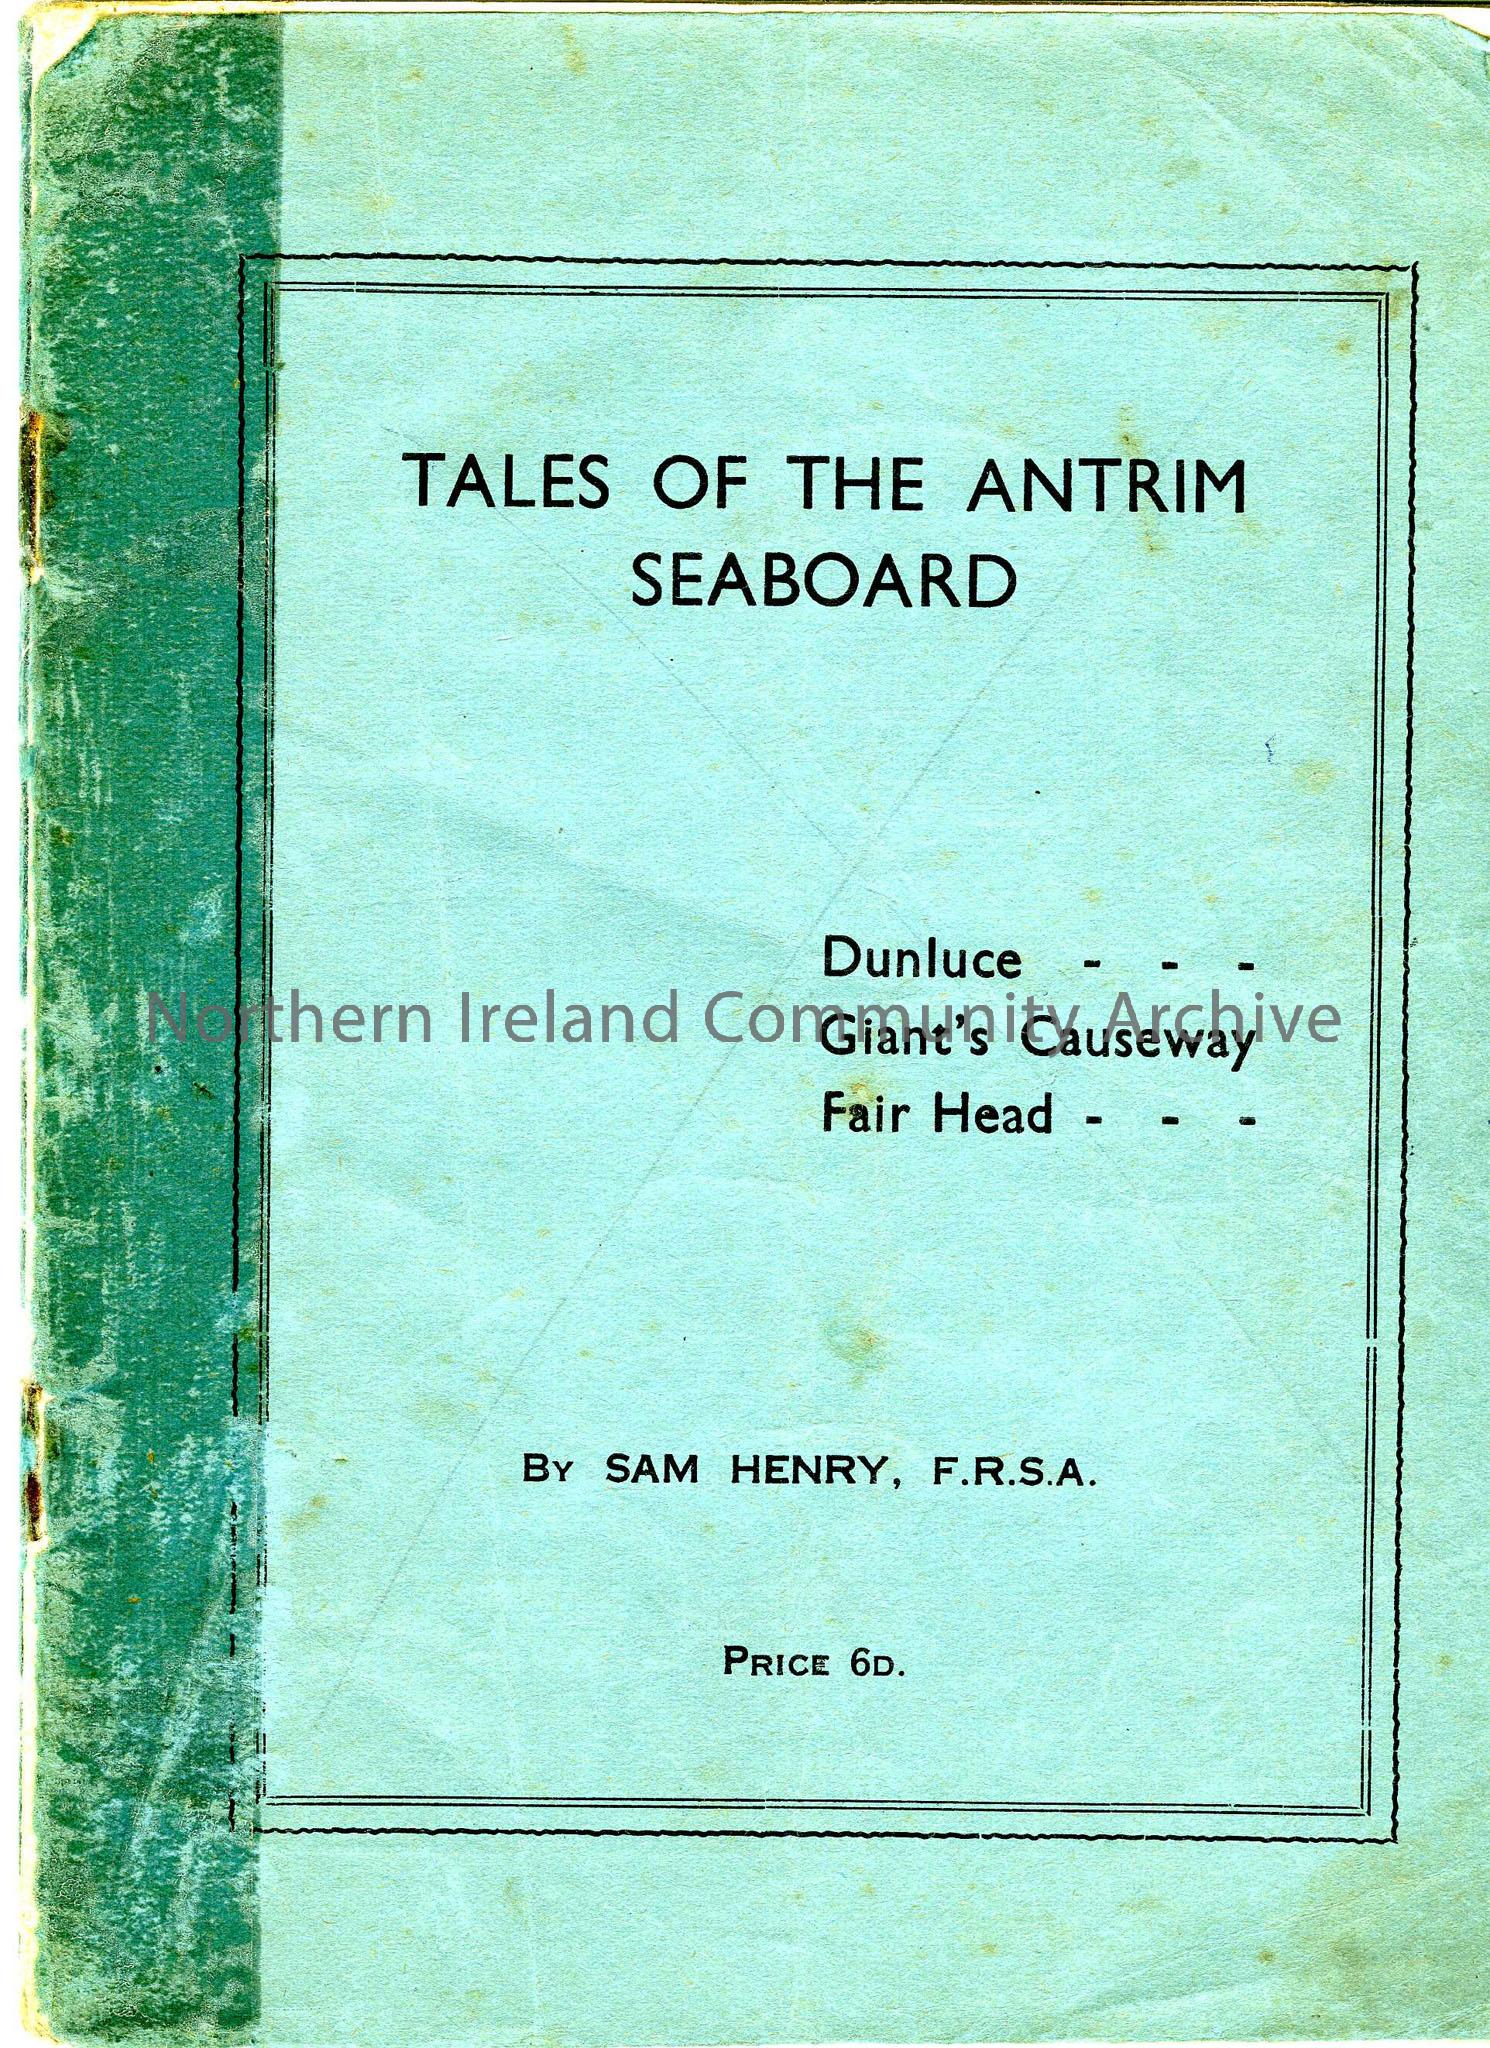 Tales of the Antrim Seaboard